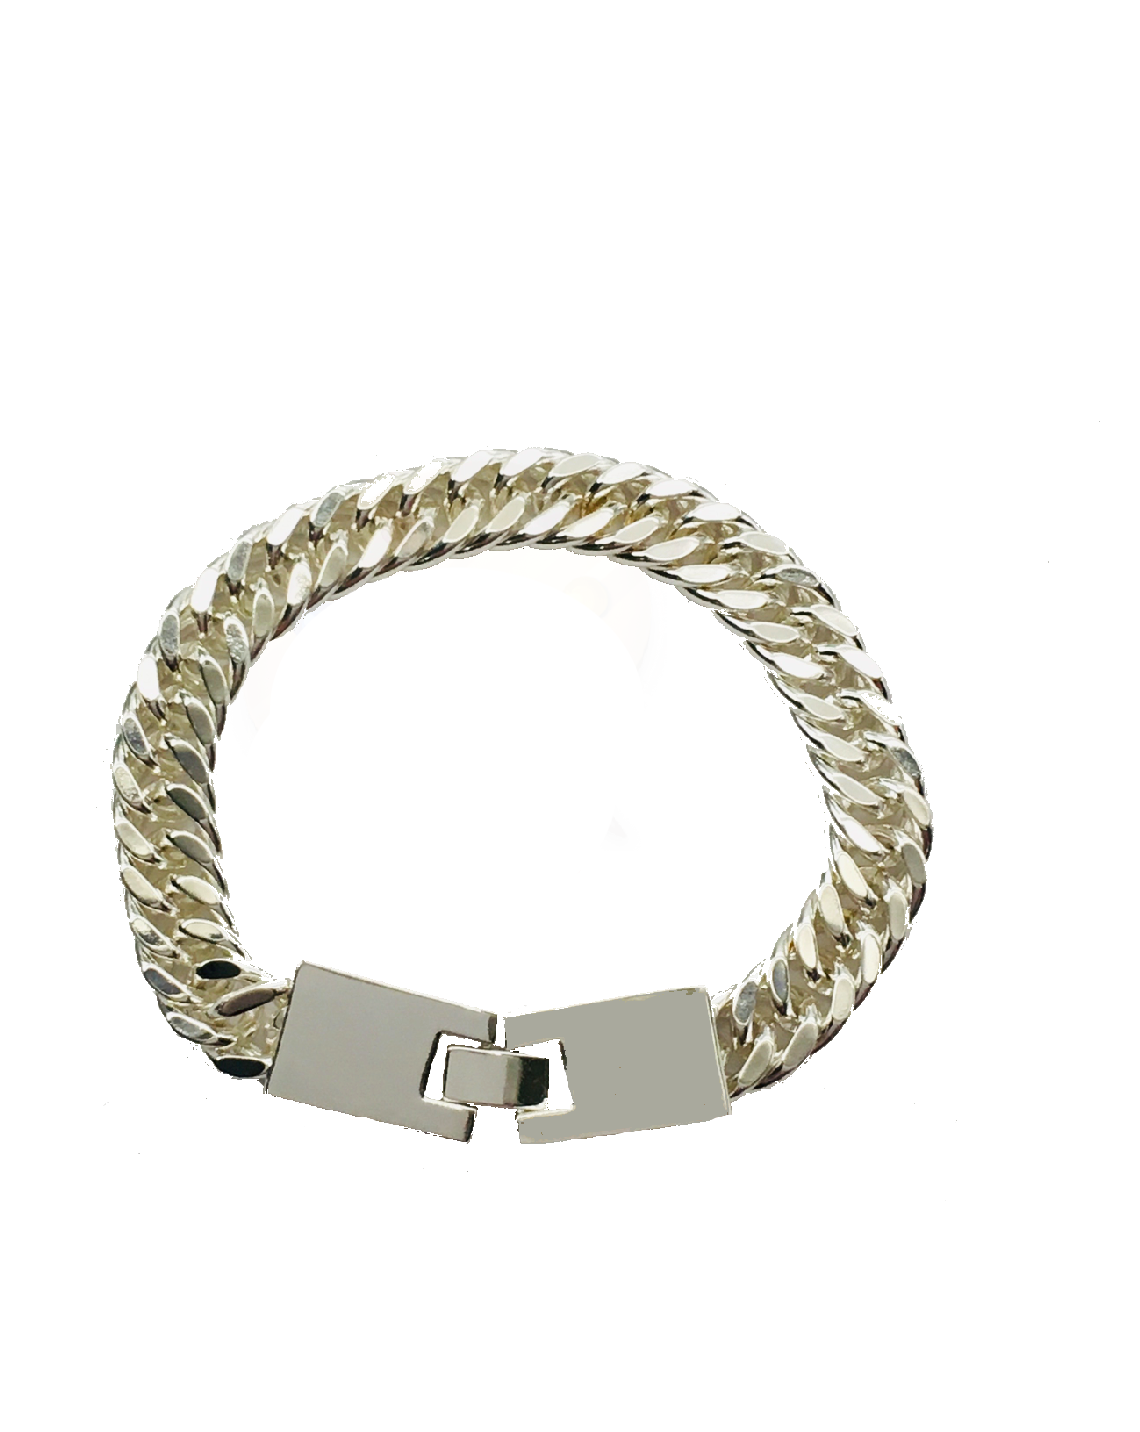 Pandora's Box Silver Curb Bracelet with Solid Clasp from Frinkle